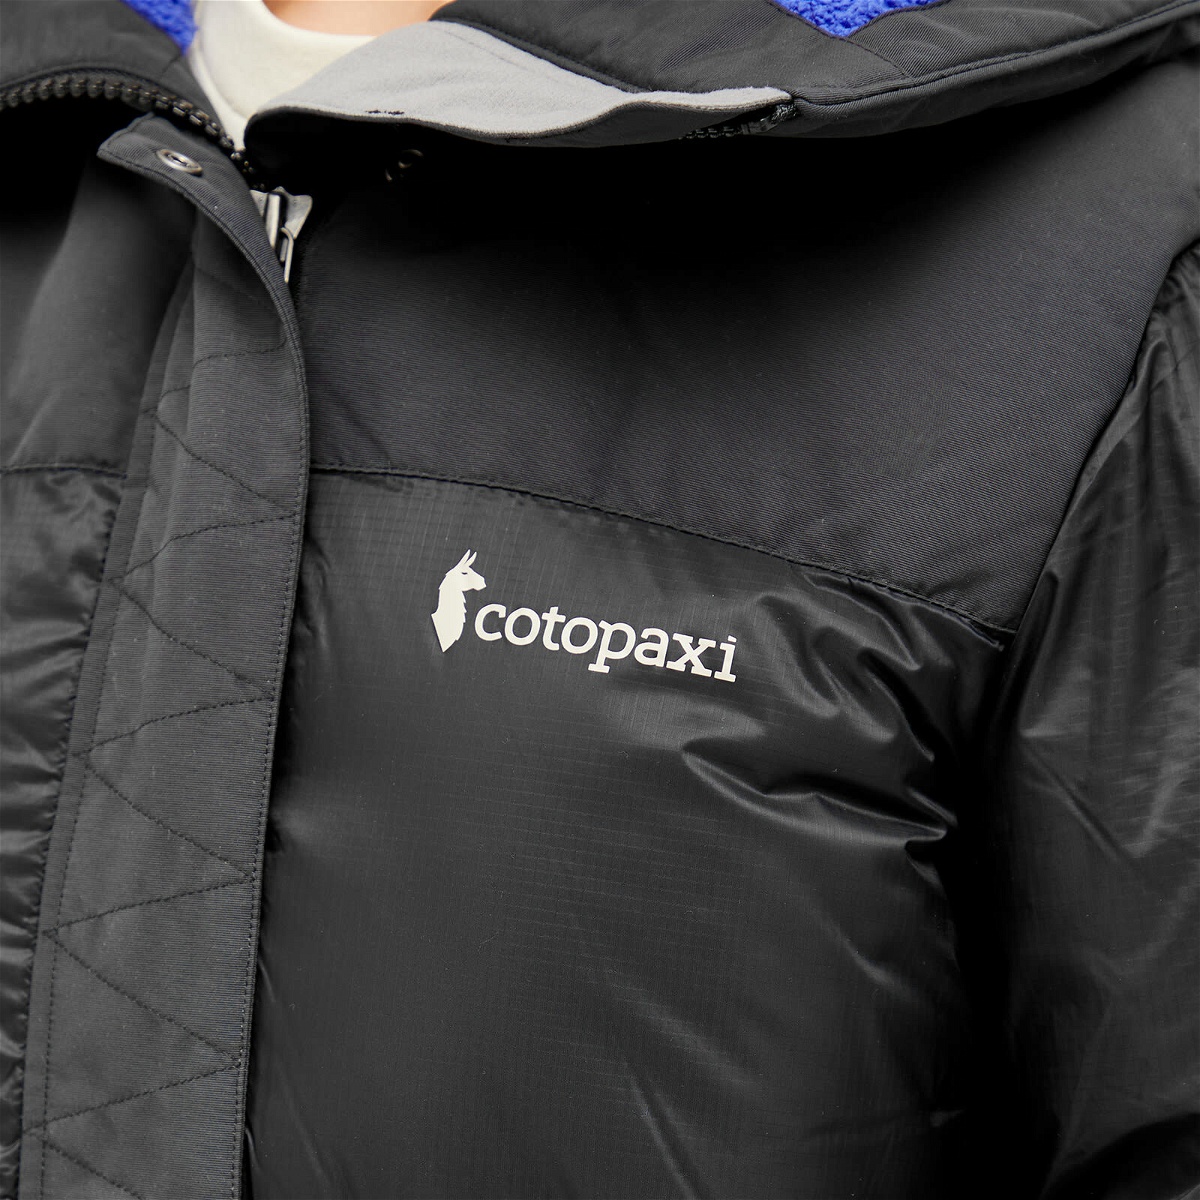 Cotopaxi Women's Solazo Down Parka Jacket in All Black Cotopaxi